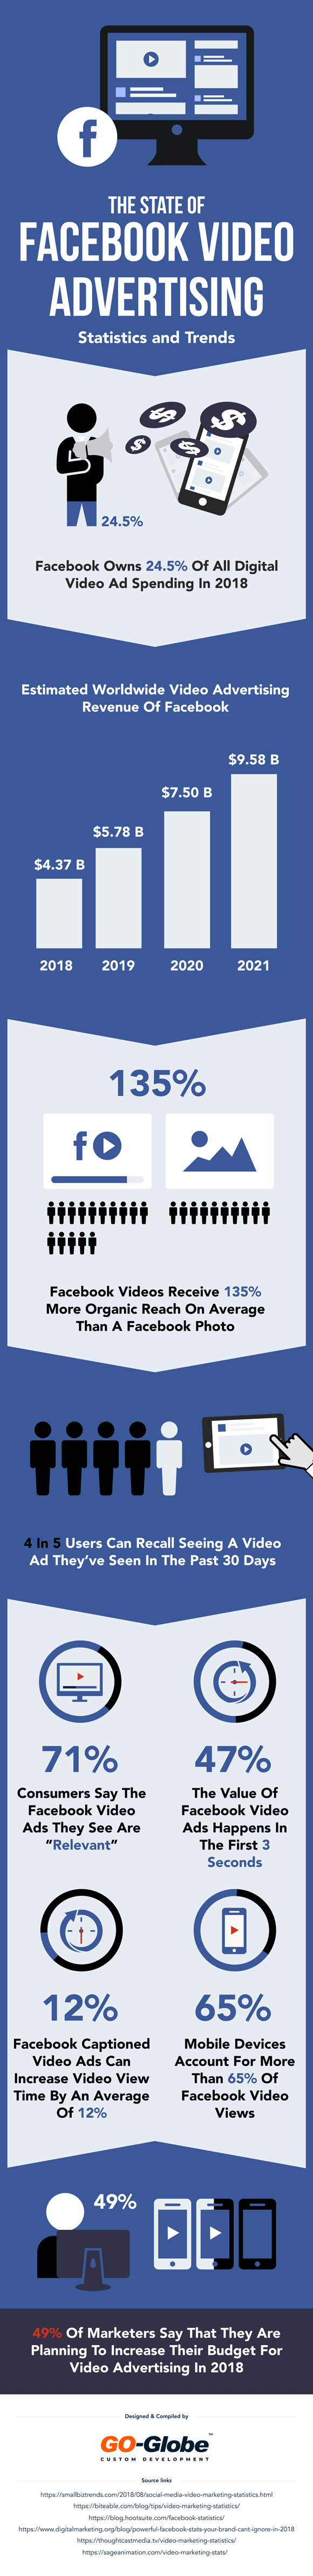 The State of Facebook Video Advertising - Statistics and Trends